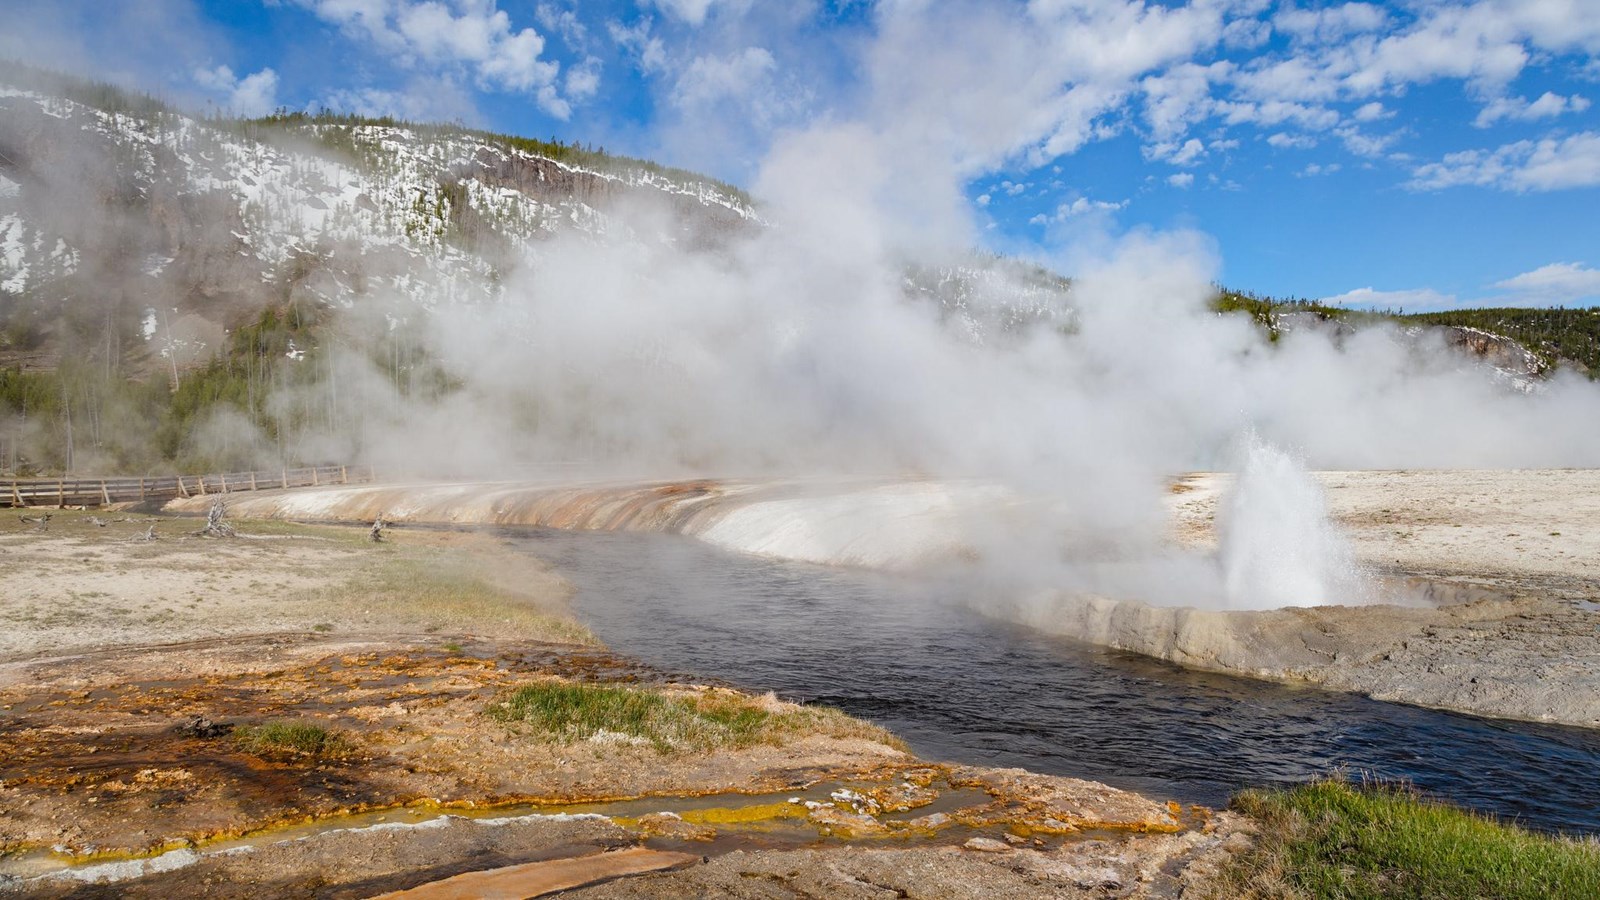 A small geyser erupts on the edge of a river flowing through a thermal basin.